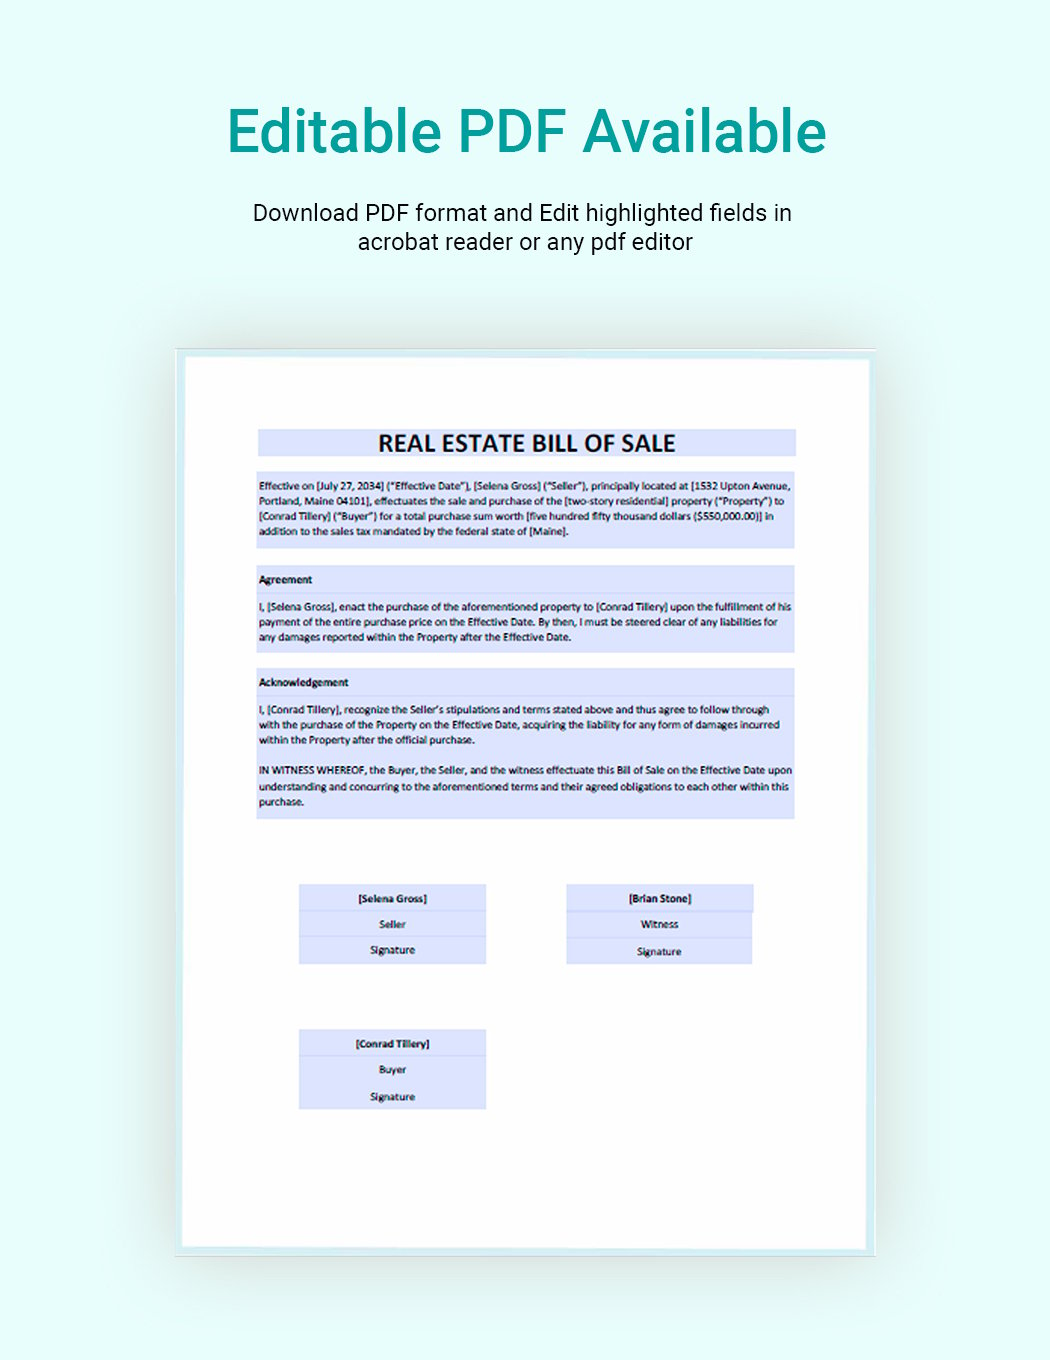 Real Estate Bill of Sale Template